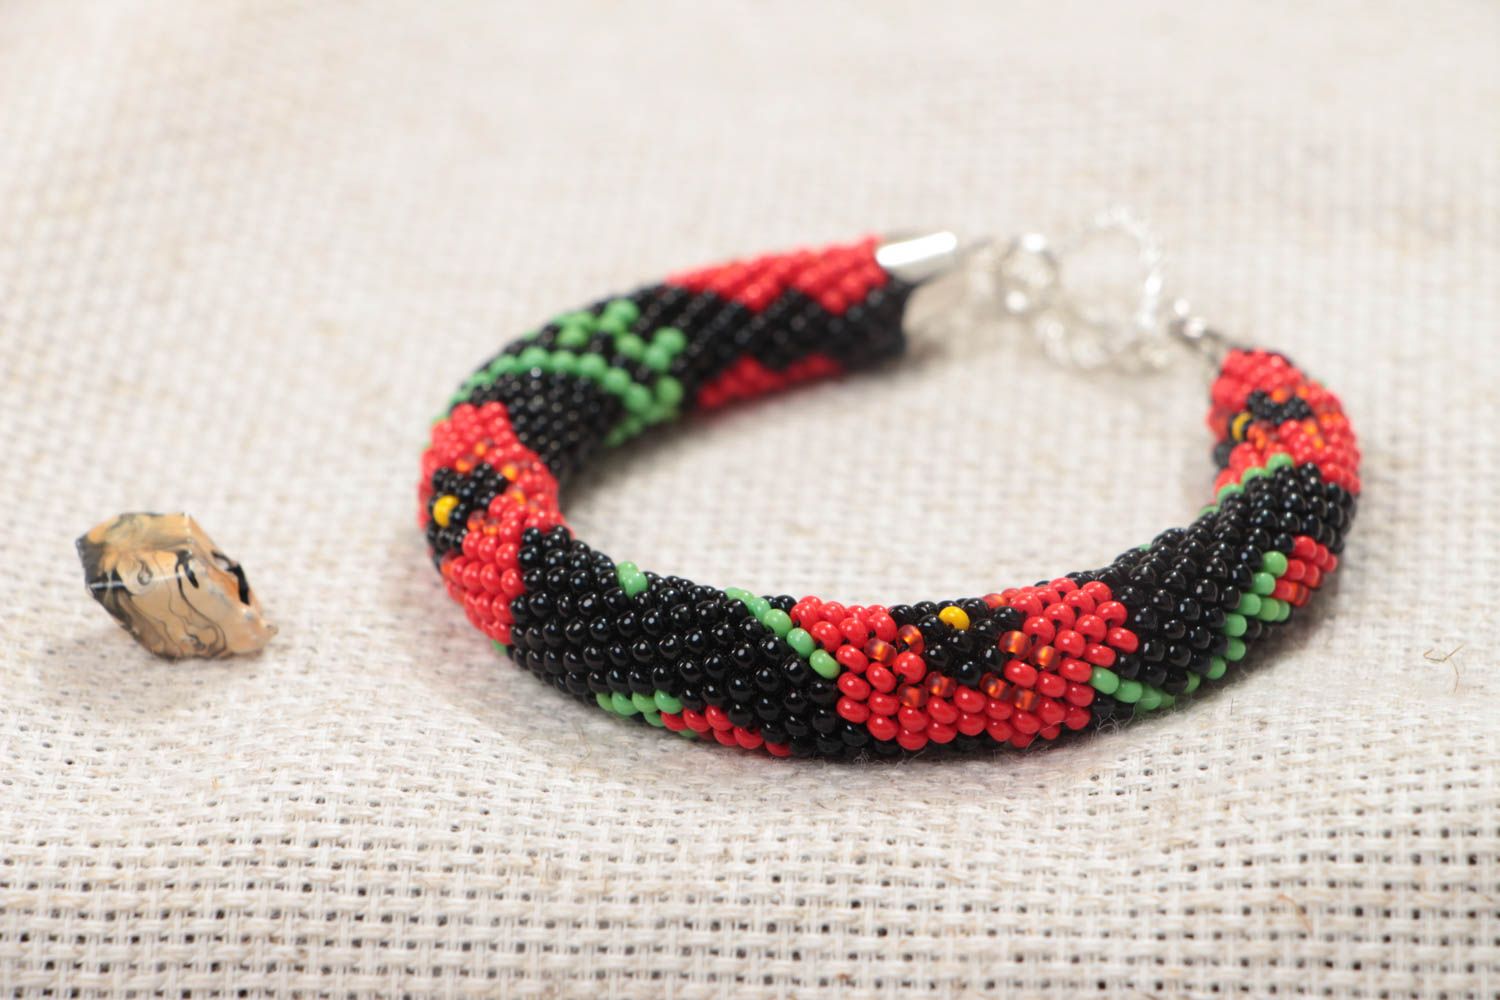 Handmade beaded cord bracelet with red floral pattern on black background photo 1